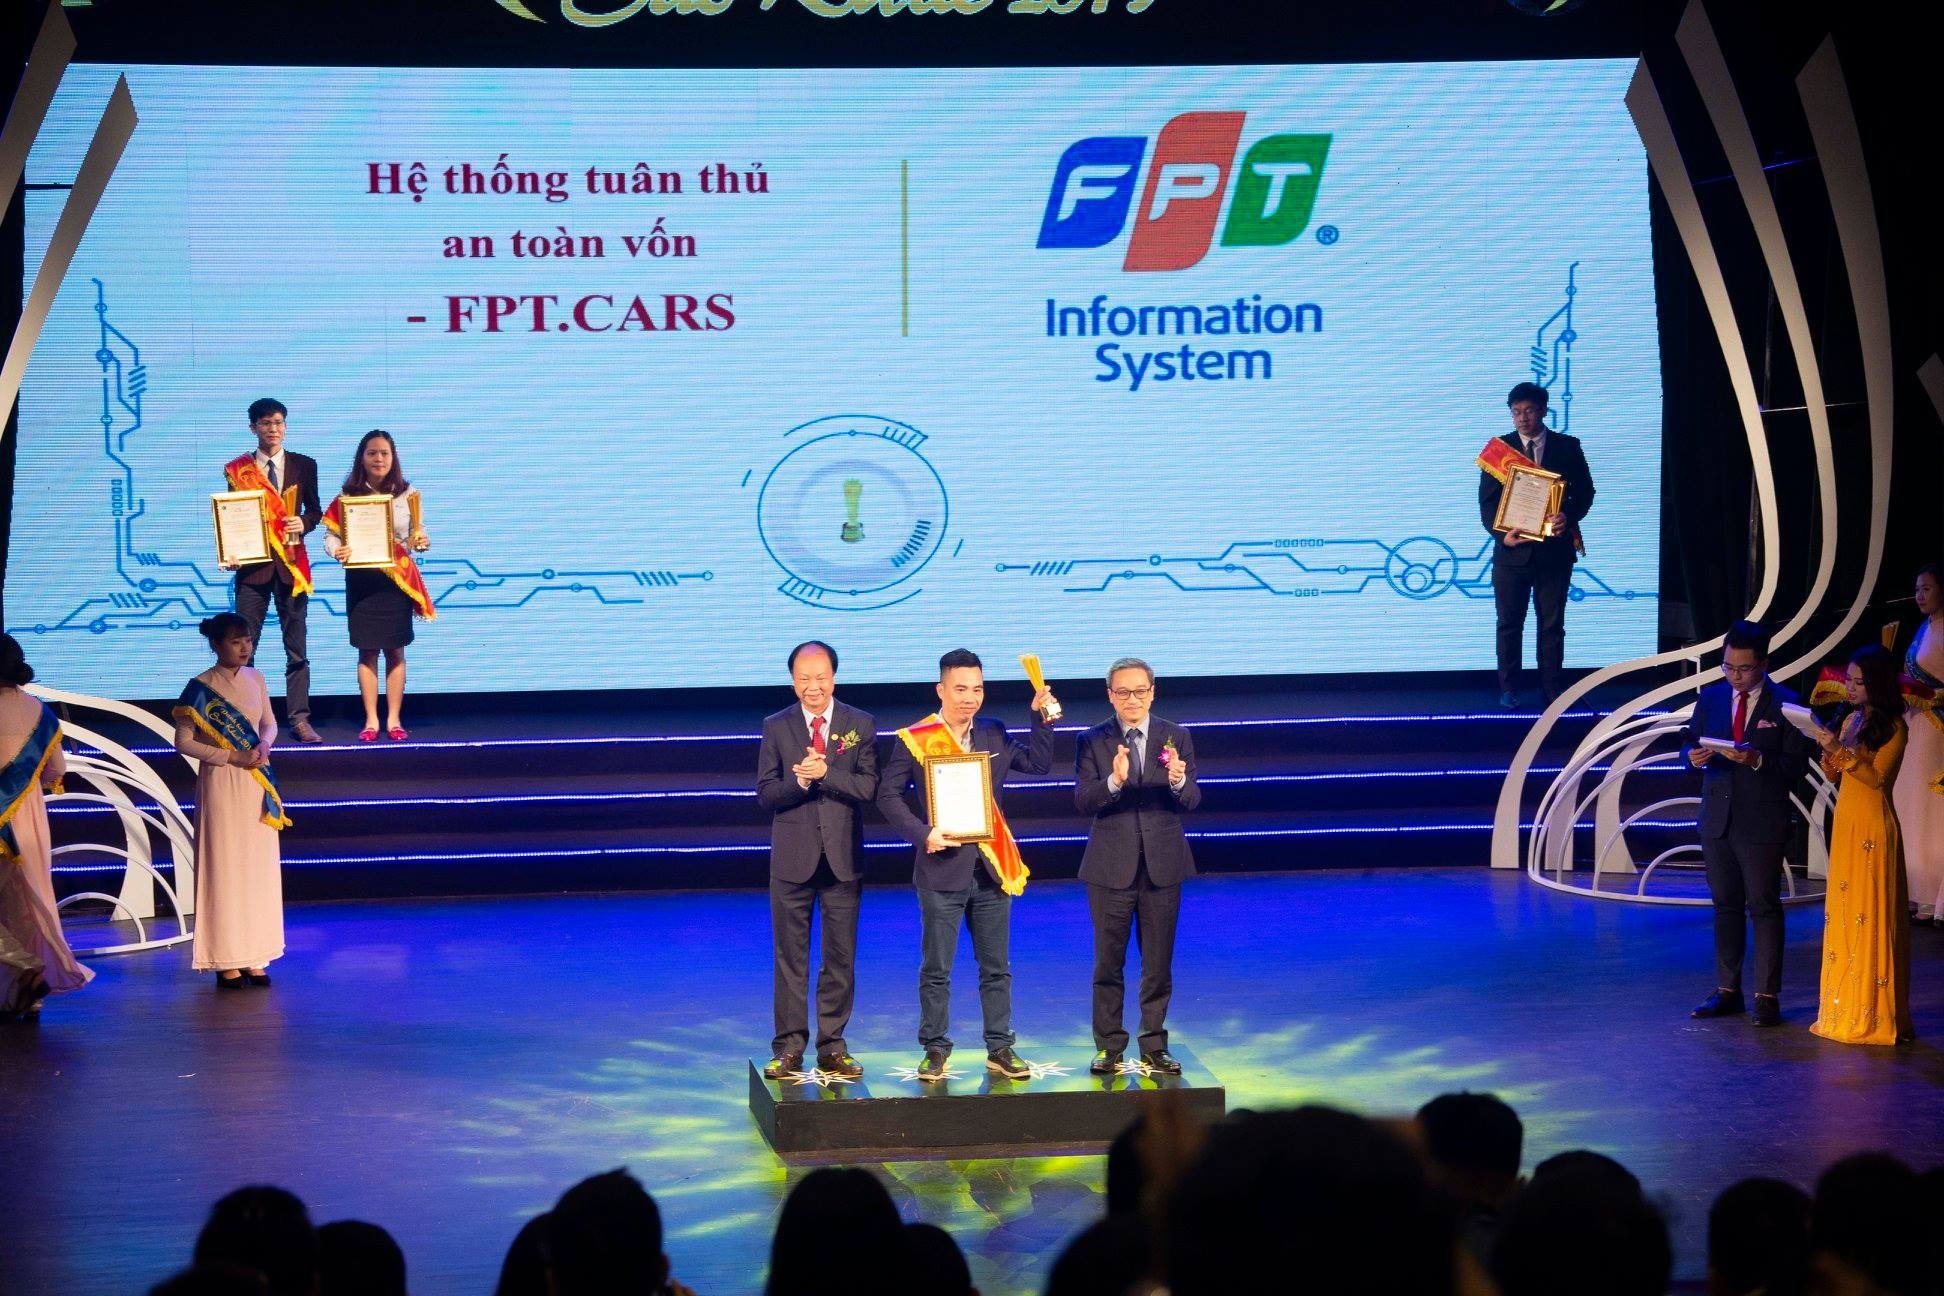 2019 Sao Khue Awards (Vietnam ICT Excellence) – Capital Adequacy Ratio System (FPT.CARS)